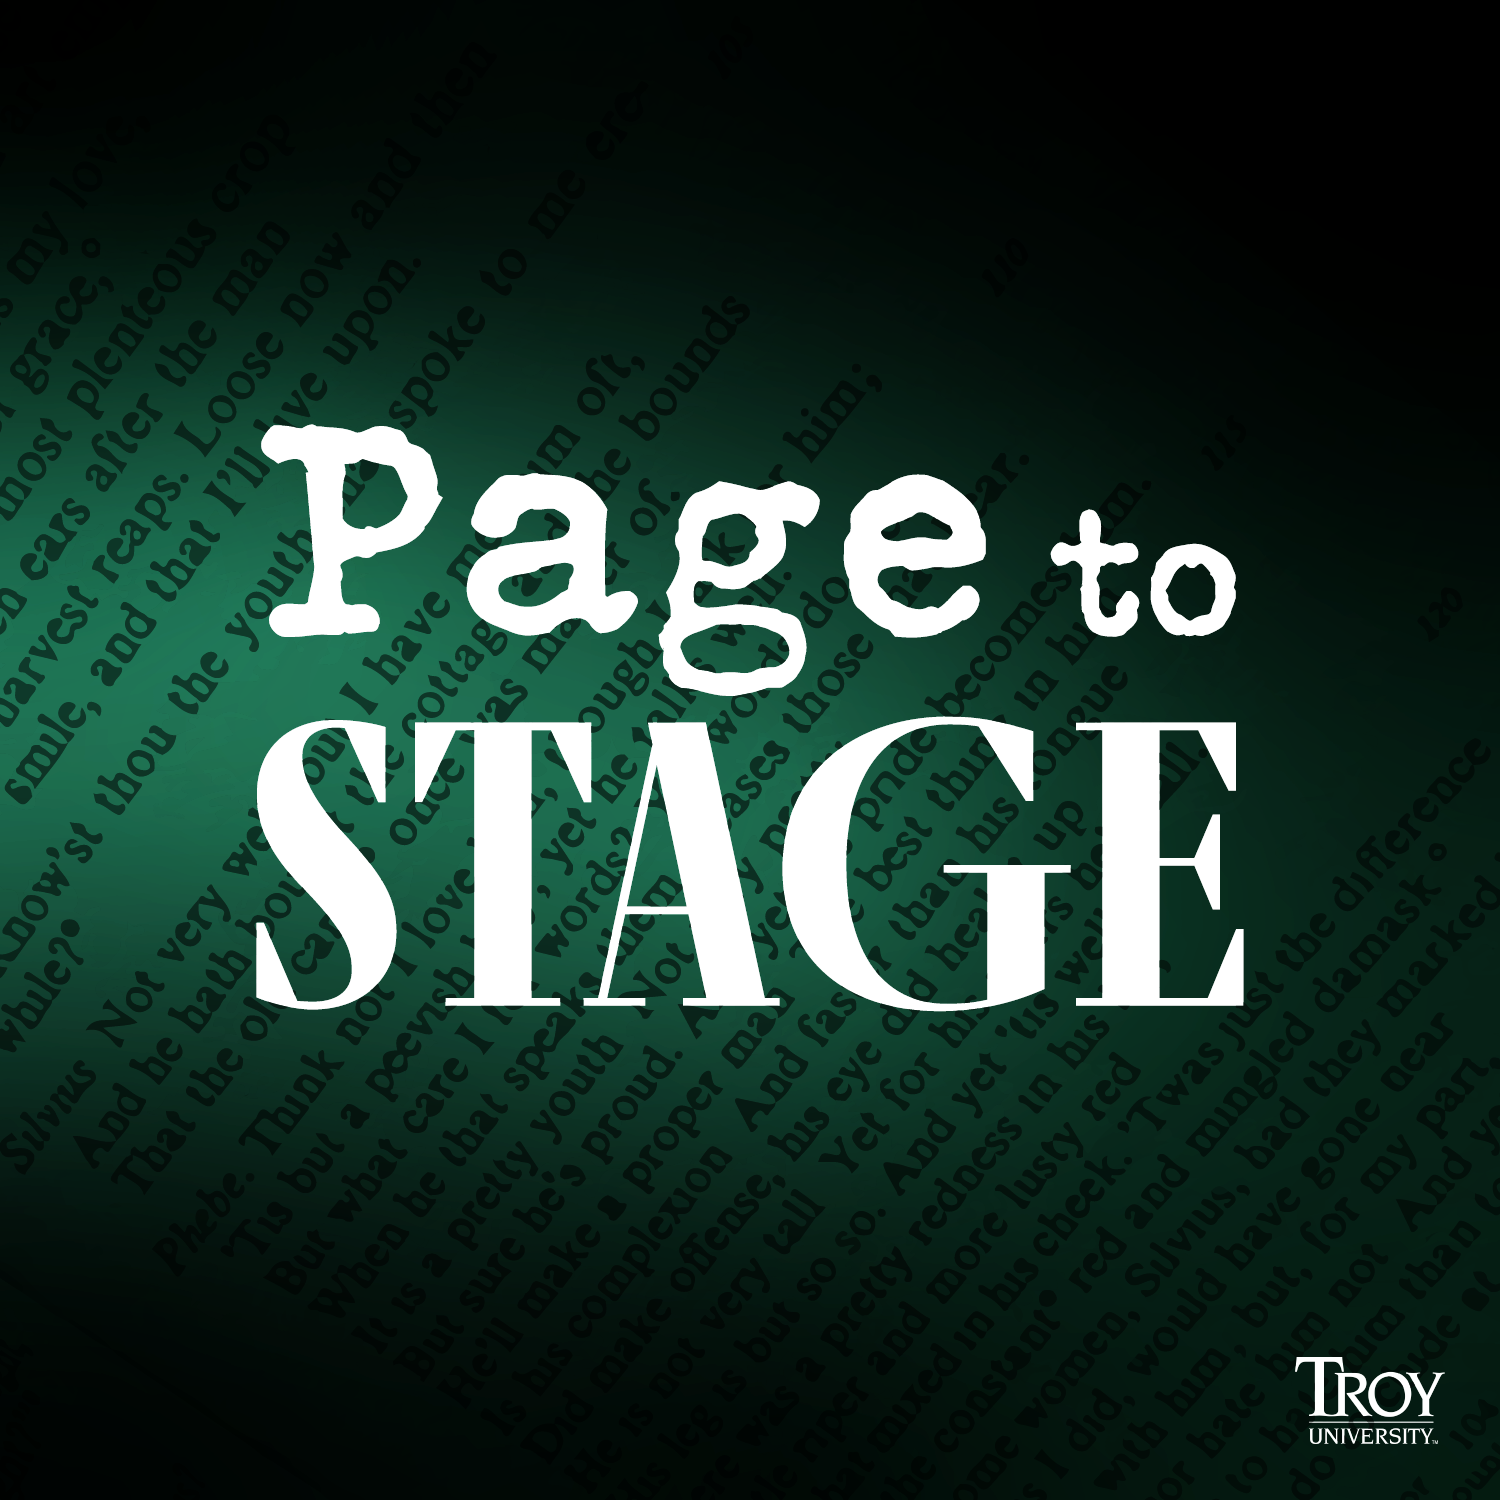 Green background of a play script with Page to Stage title